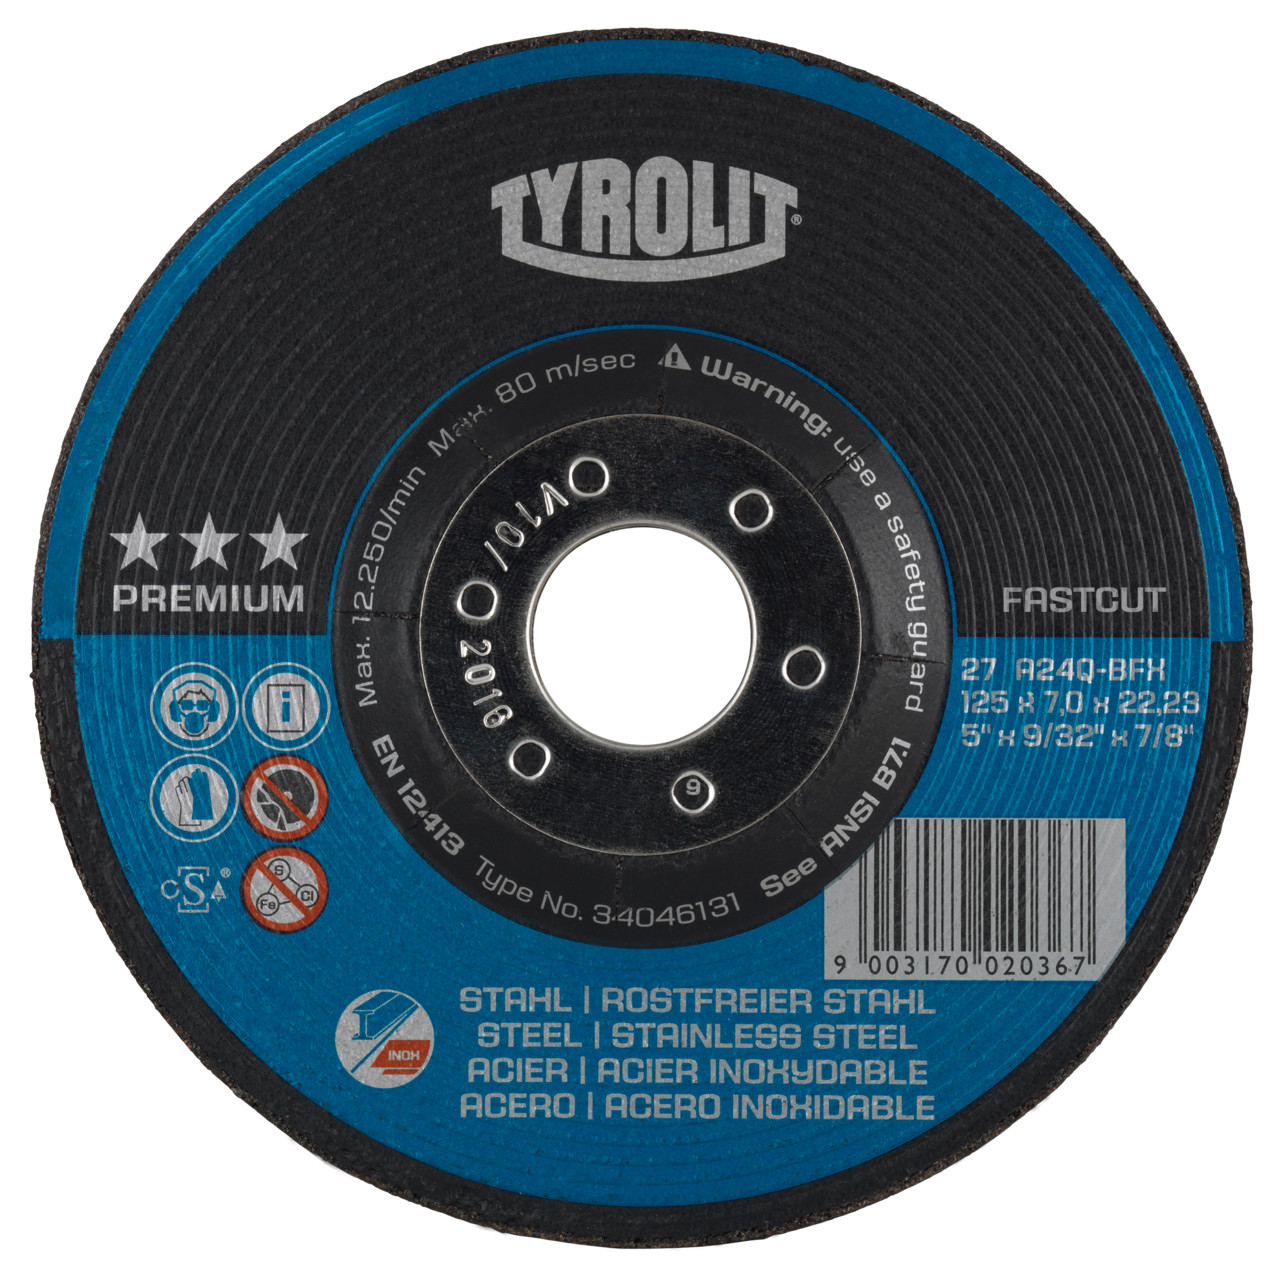 TYROLIT grinding wheel DxUxH 115x7x22.23 FASTCUT for steel and stainless steel, shape: 27 - offset version, Art. 5293